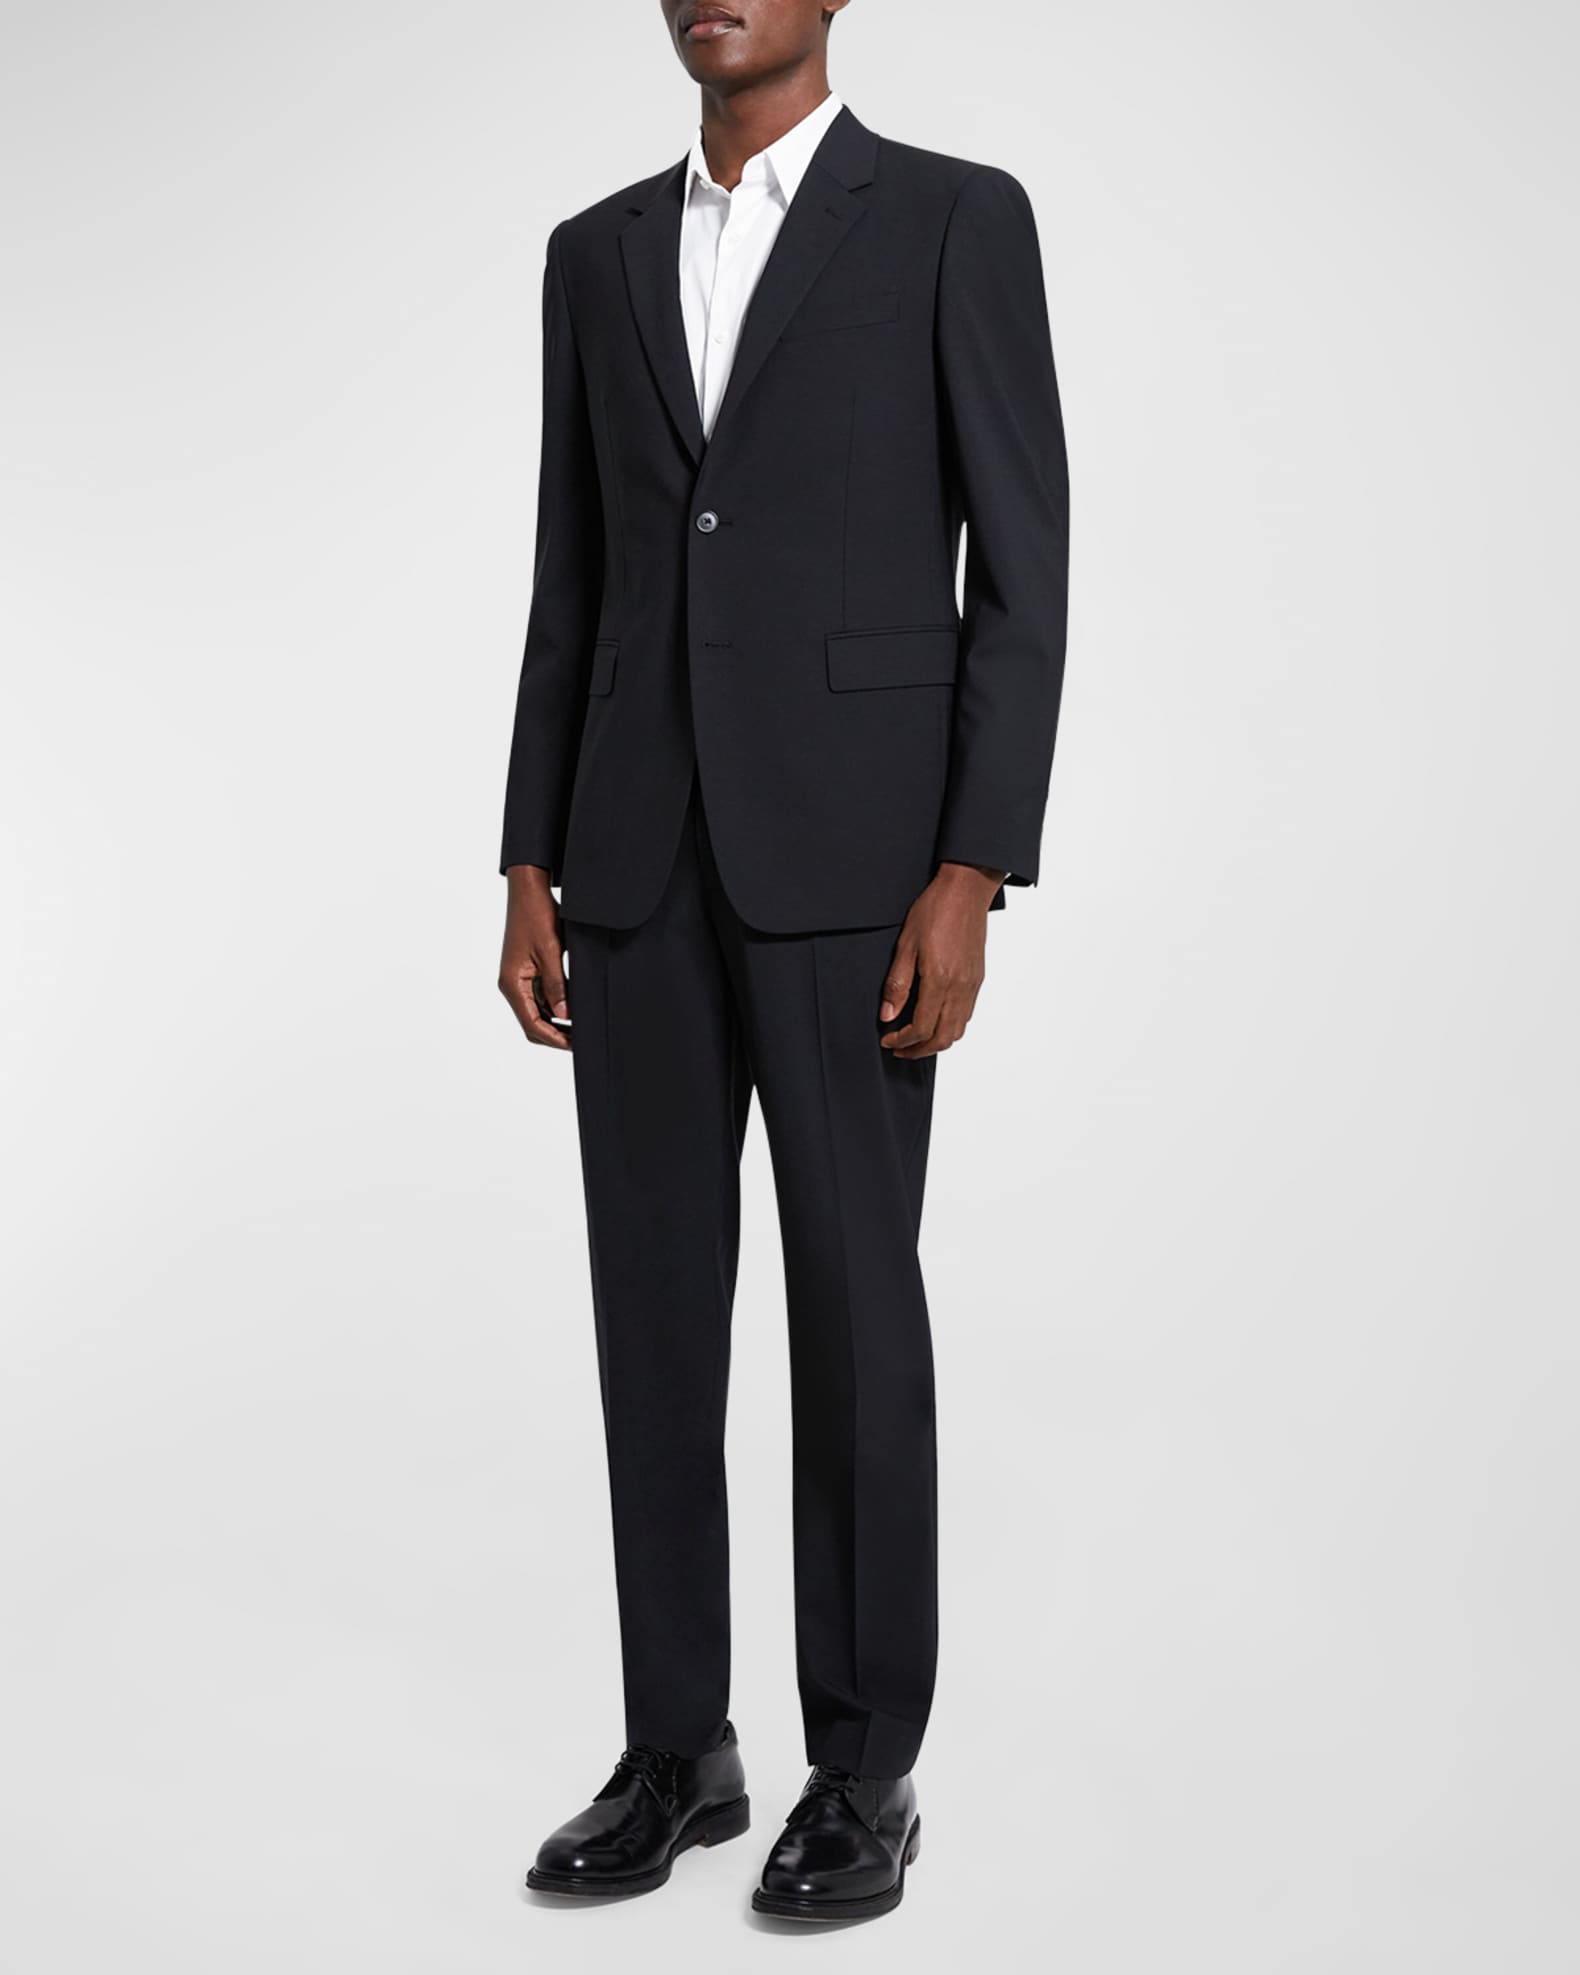 Theory Men's Chambers in New Tailor | Neiman Marcus